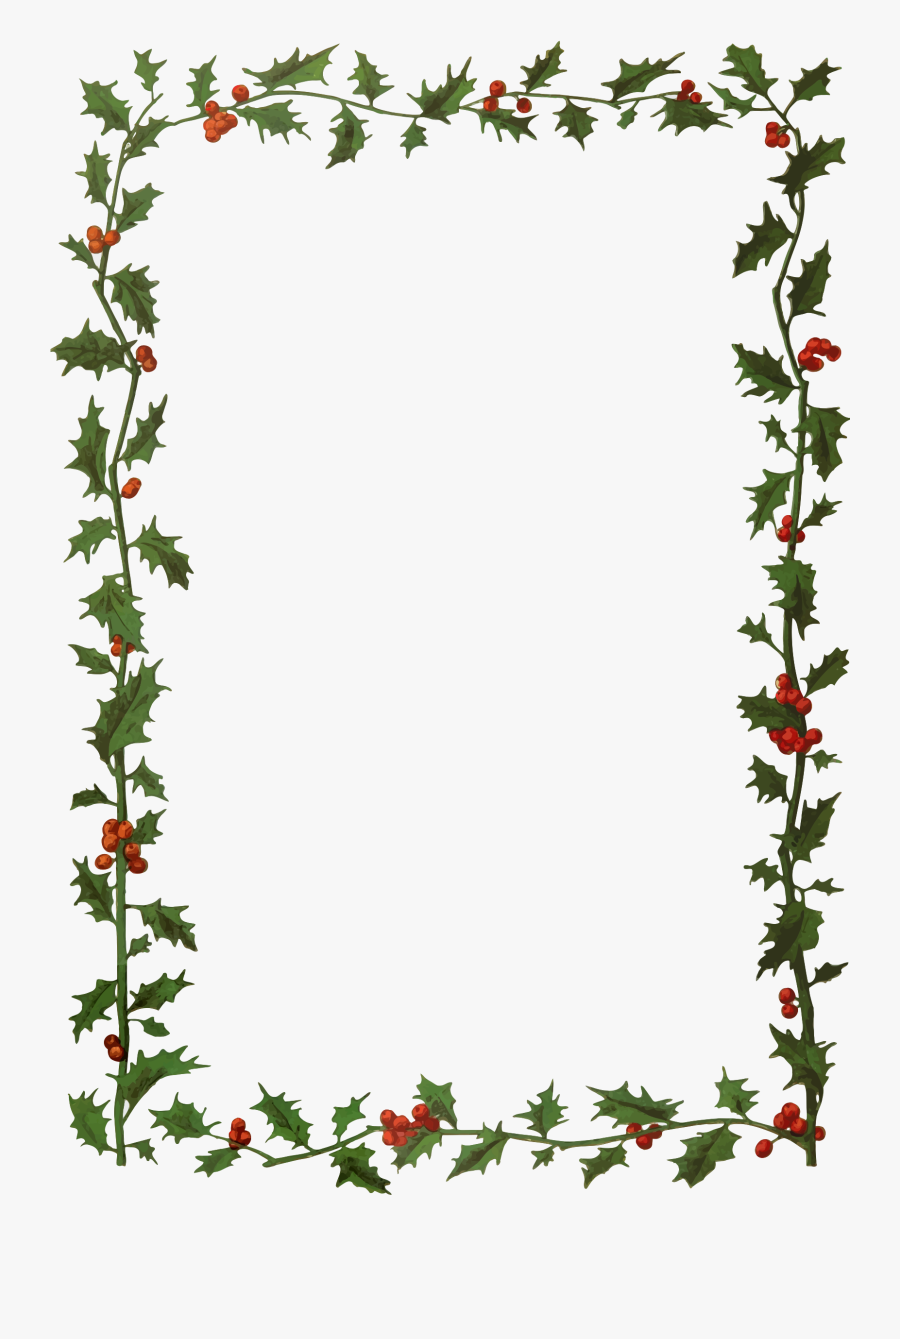 Holly Frame 2 Clip Arts - Christmas Holly Frame Png, Transparent Clipart